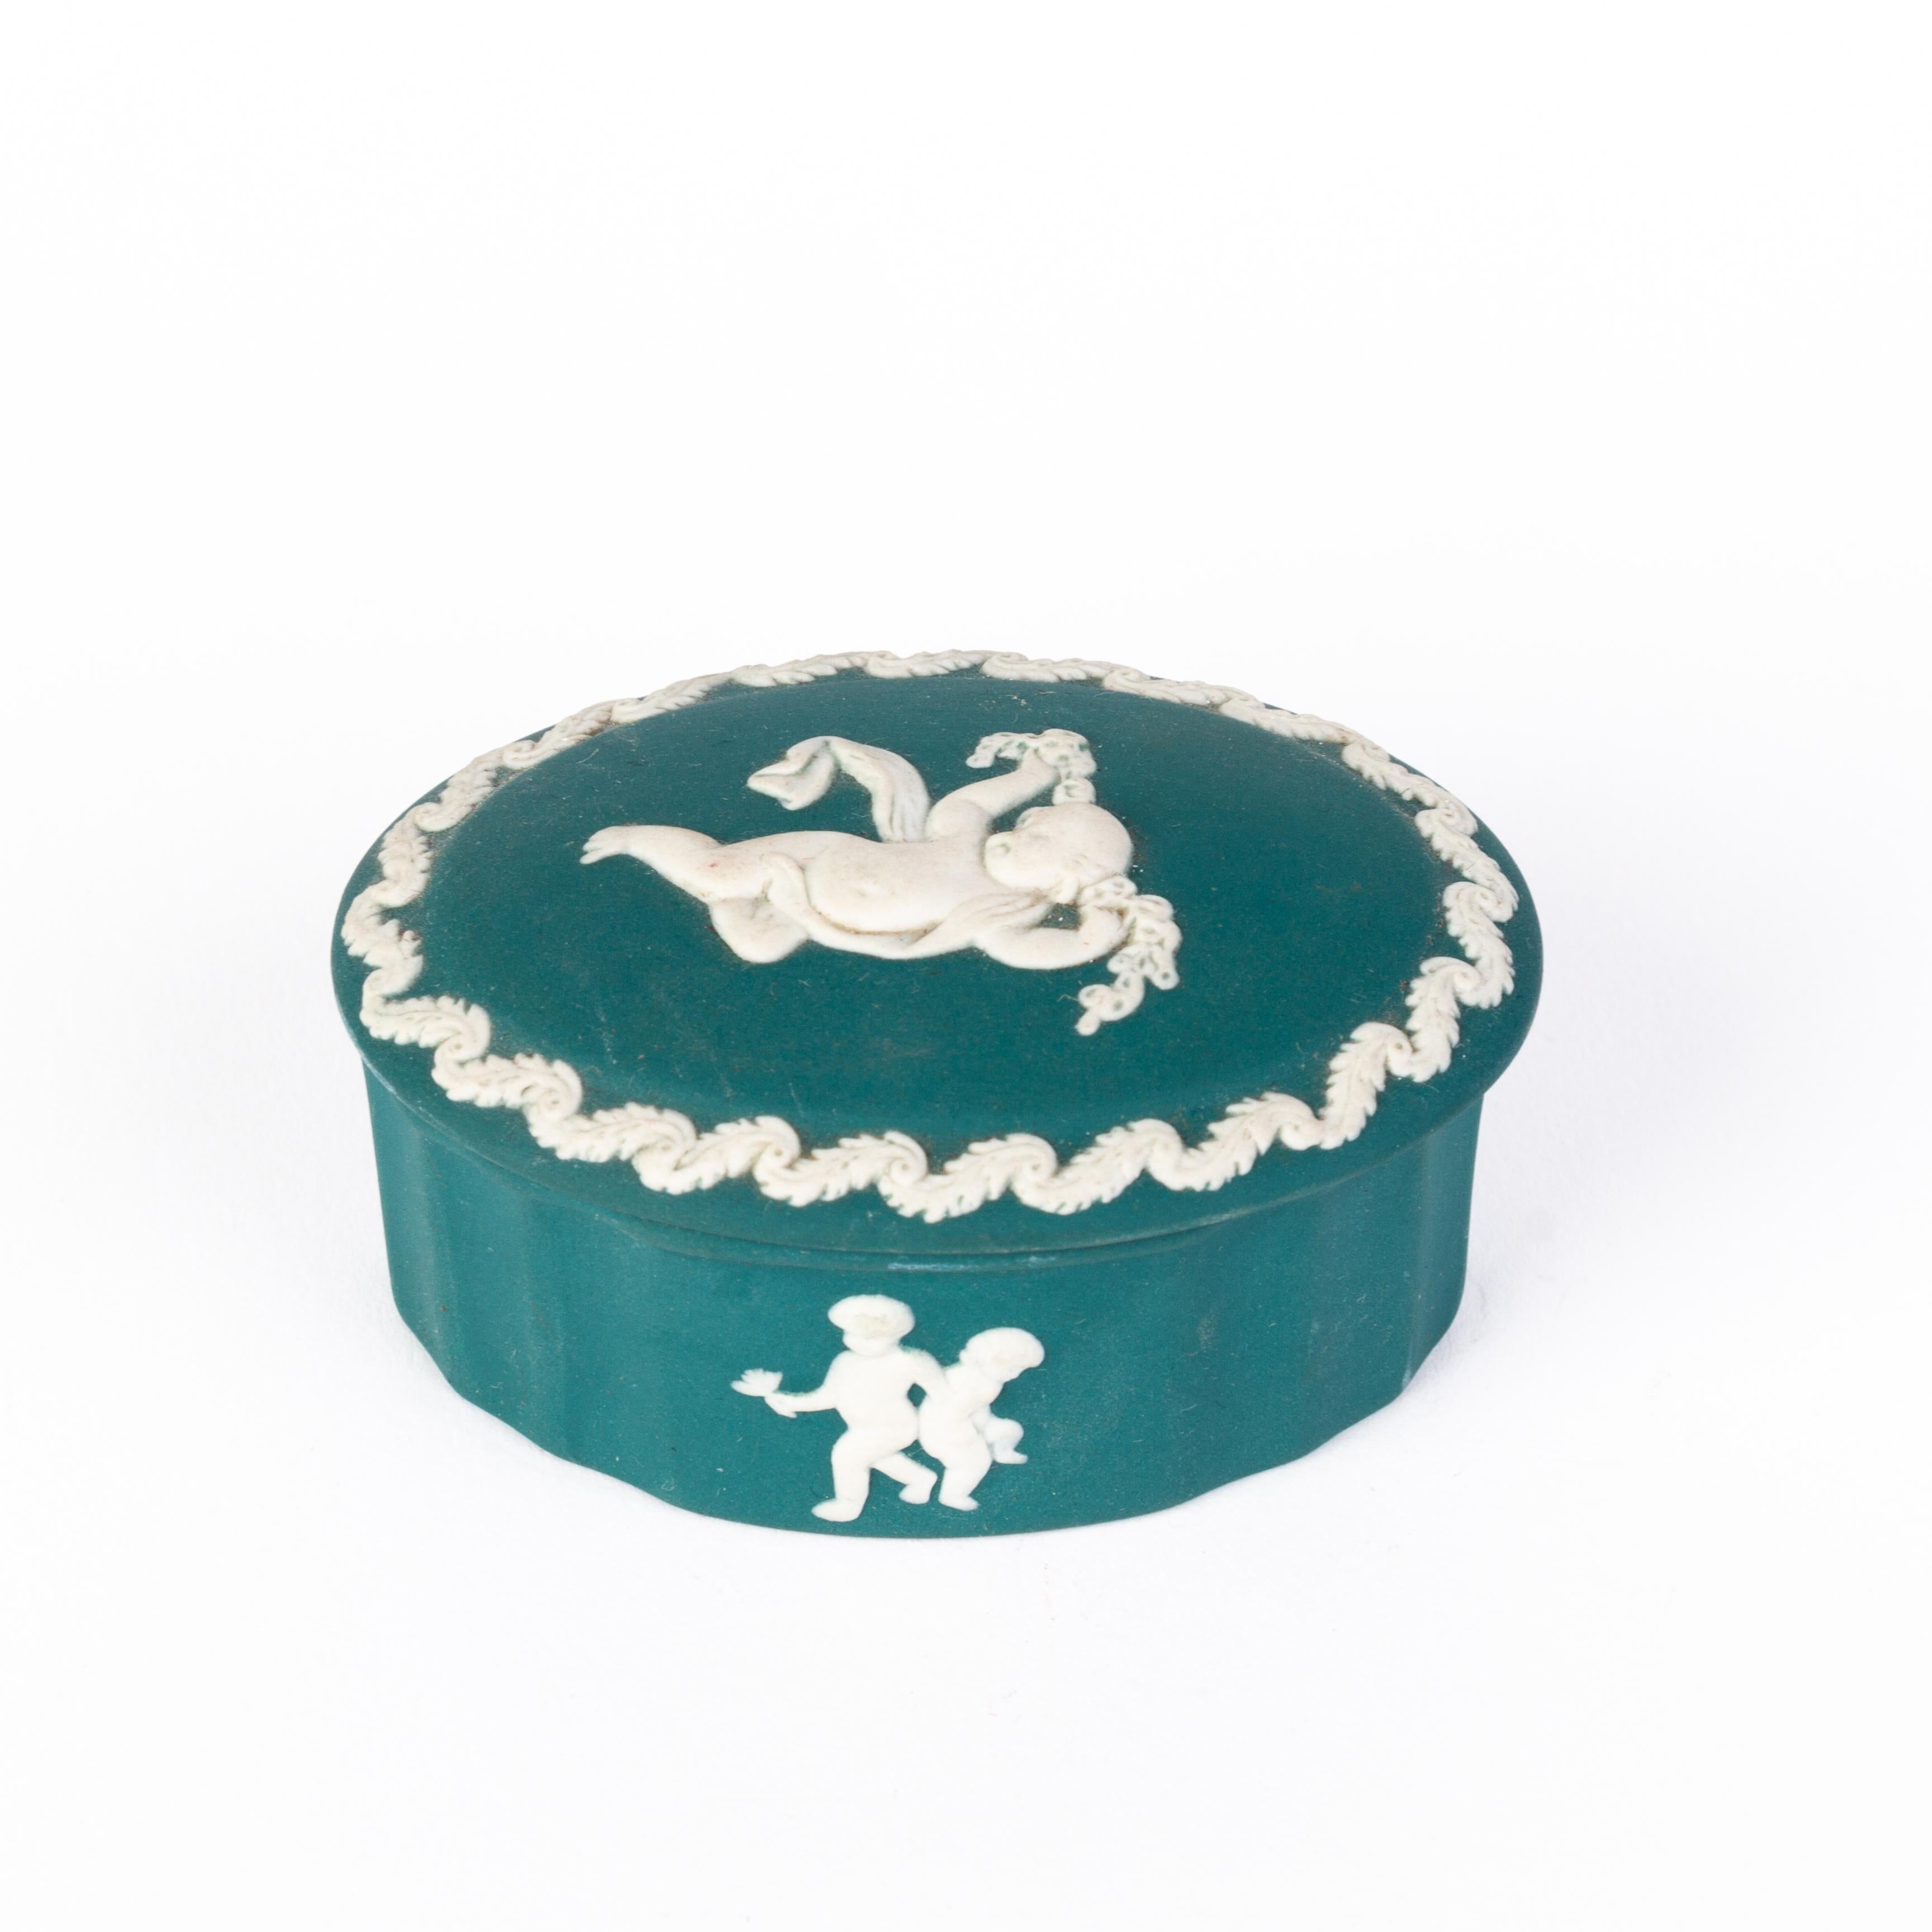 Wedgwood Turquoise Ground Jasperware Neoclassical Putto Lidded Trinket Box 
Good condition
Free international shipping.